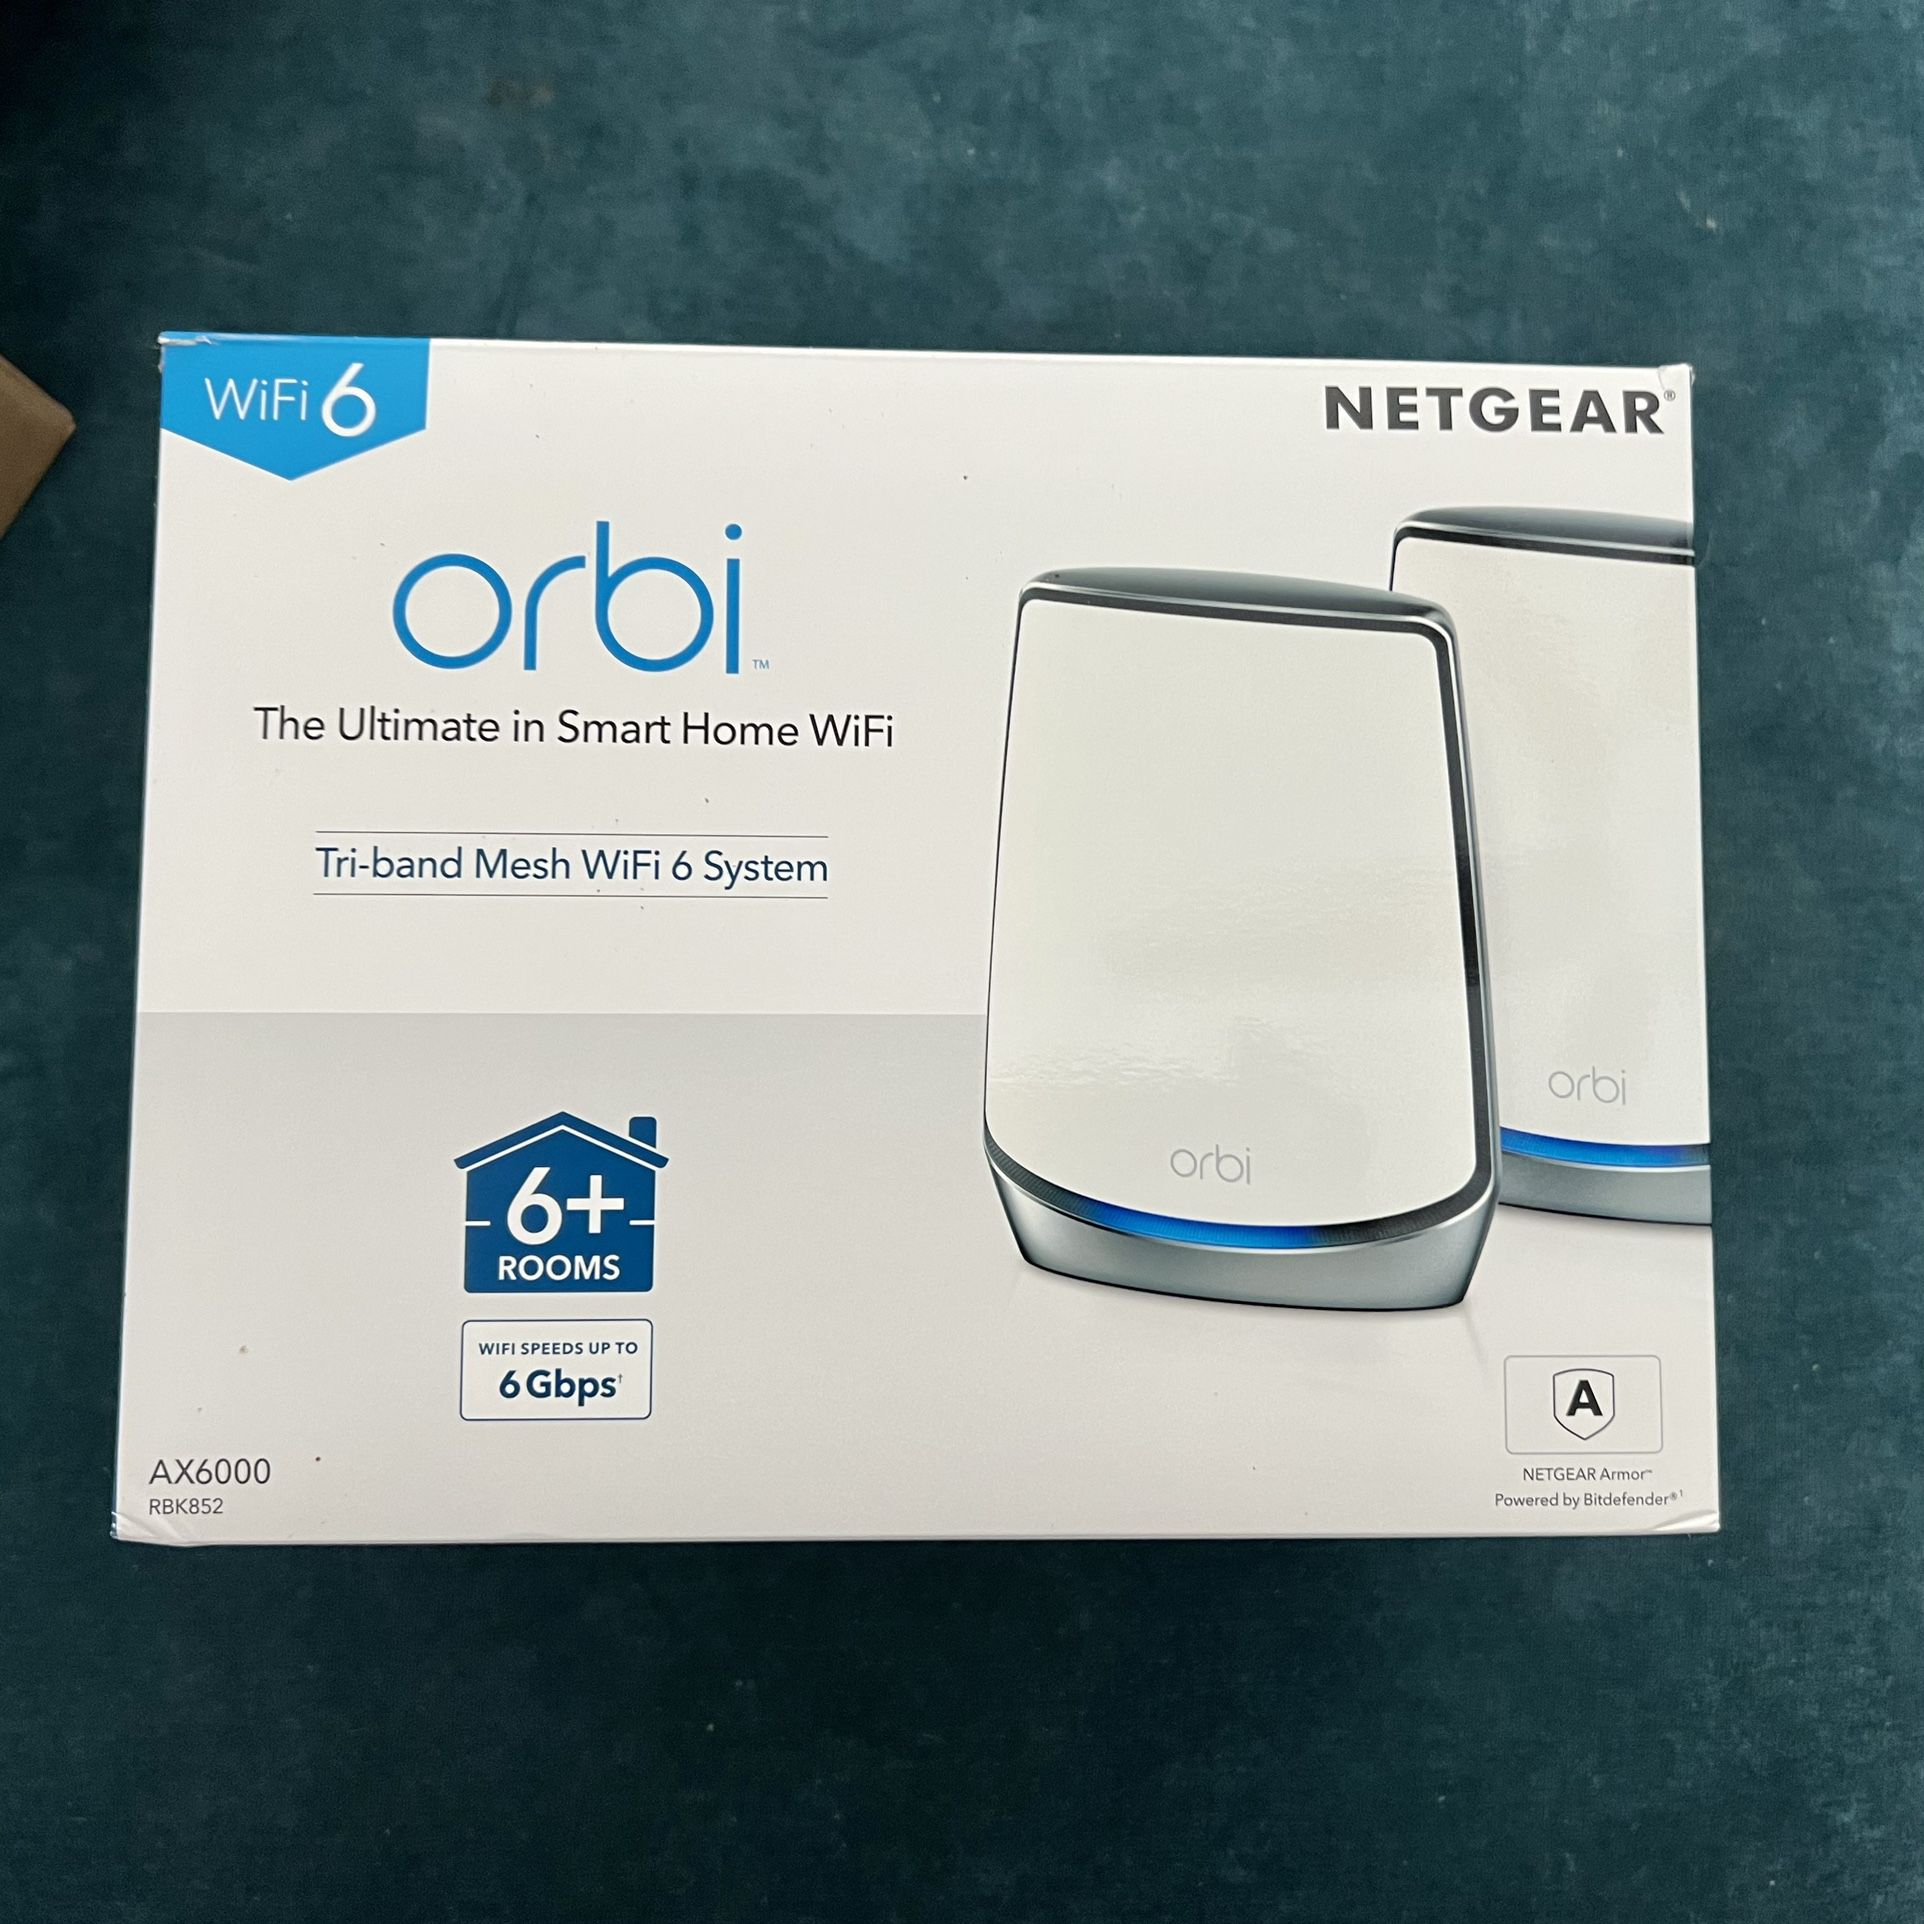 NETGEAR Orbi Whole Home Tri-band Mesh WiFi 6 System (RBK852) – 12-Stream Router with 1 Satellite Extender | Coverage up to 5,000 sq. ft., 100 Devices 